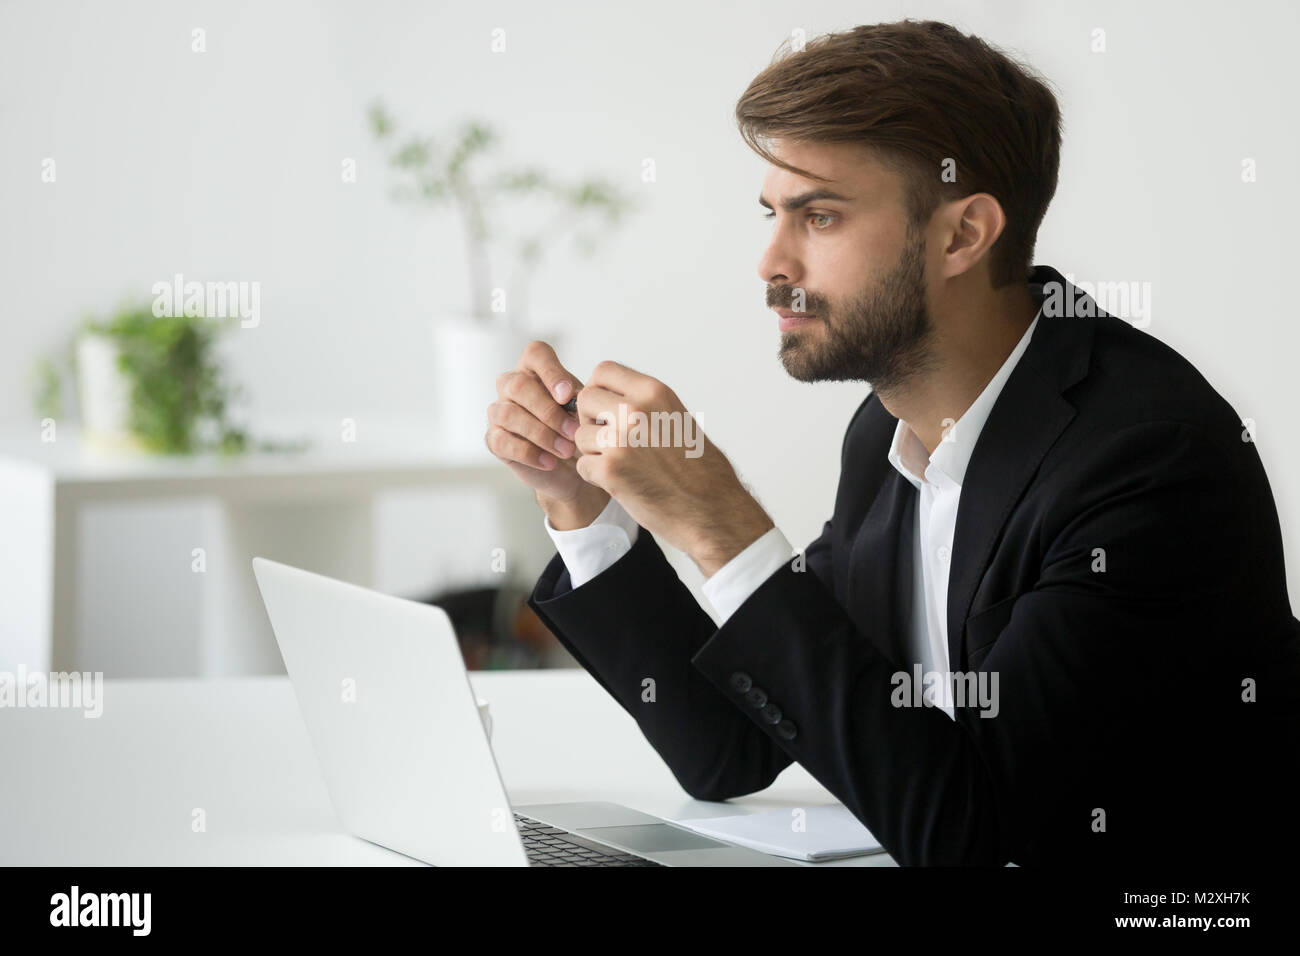 Thoughtful young businessman in suit thinking of business proble Stock Photo